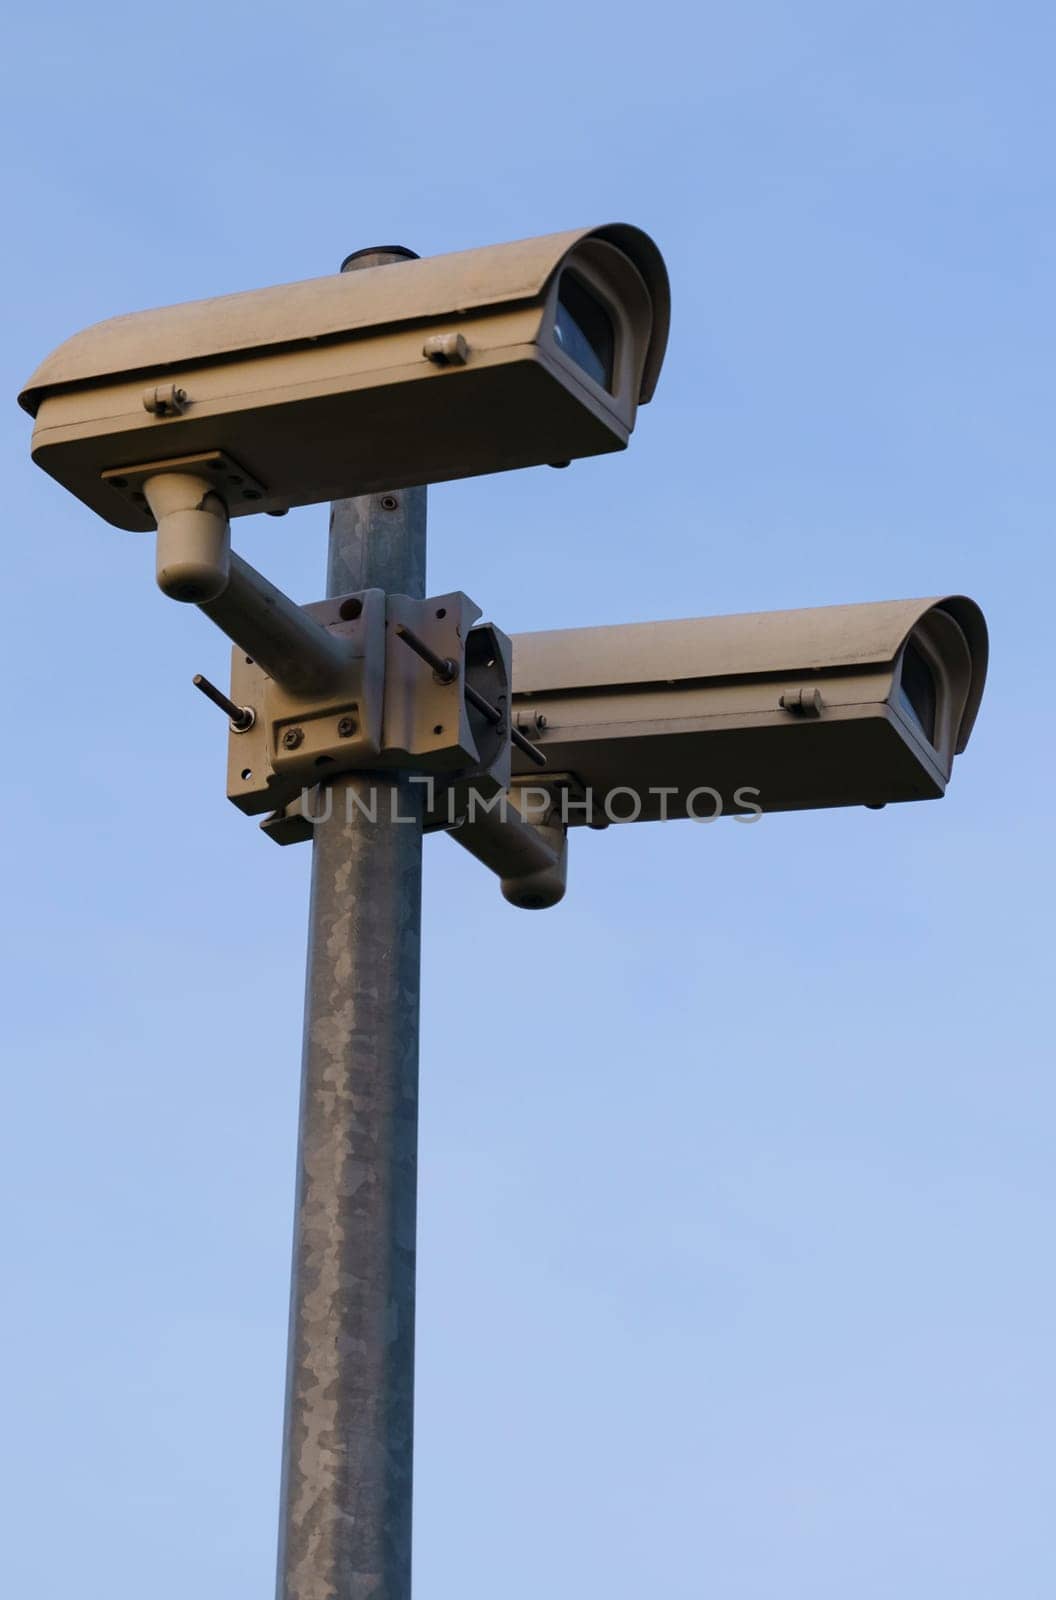 Surveillance cameras mounted on a pole against the blue sky. by Sd28DimoN_1976